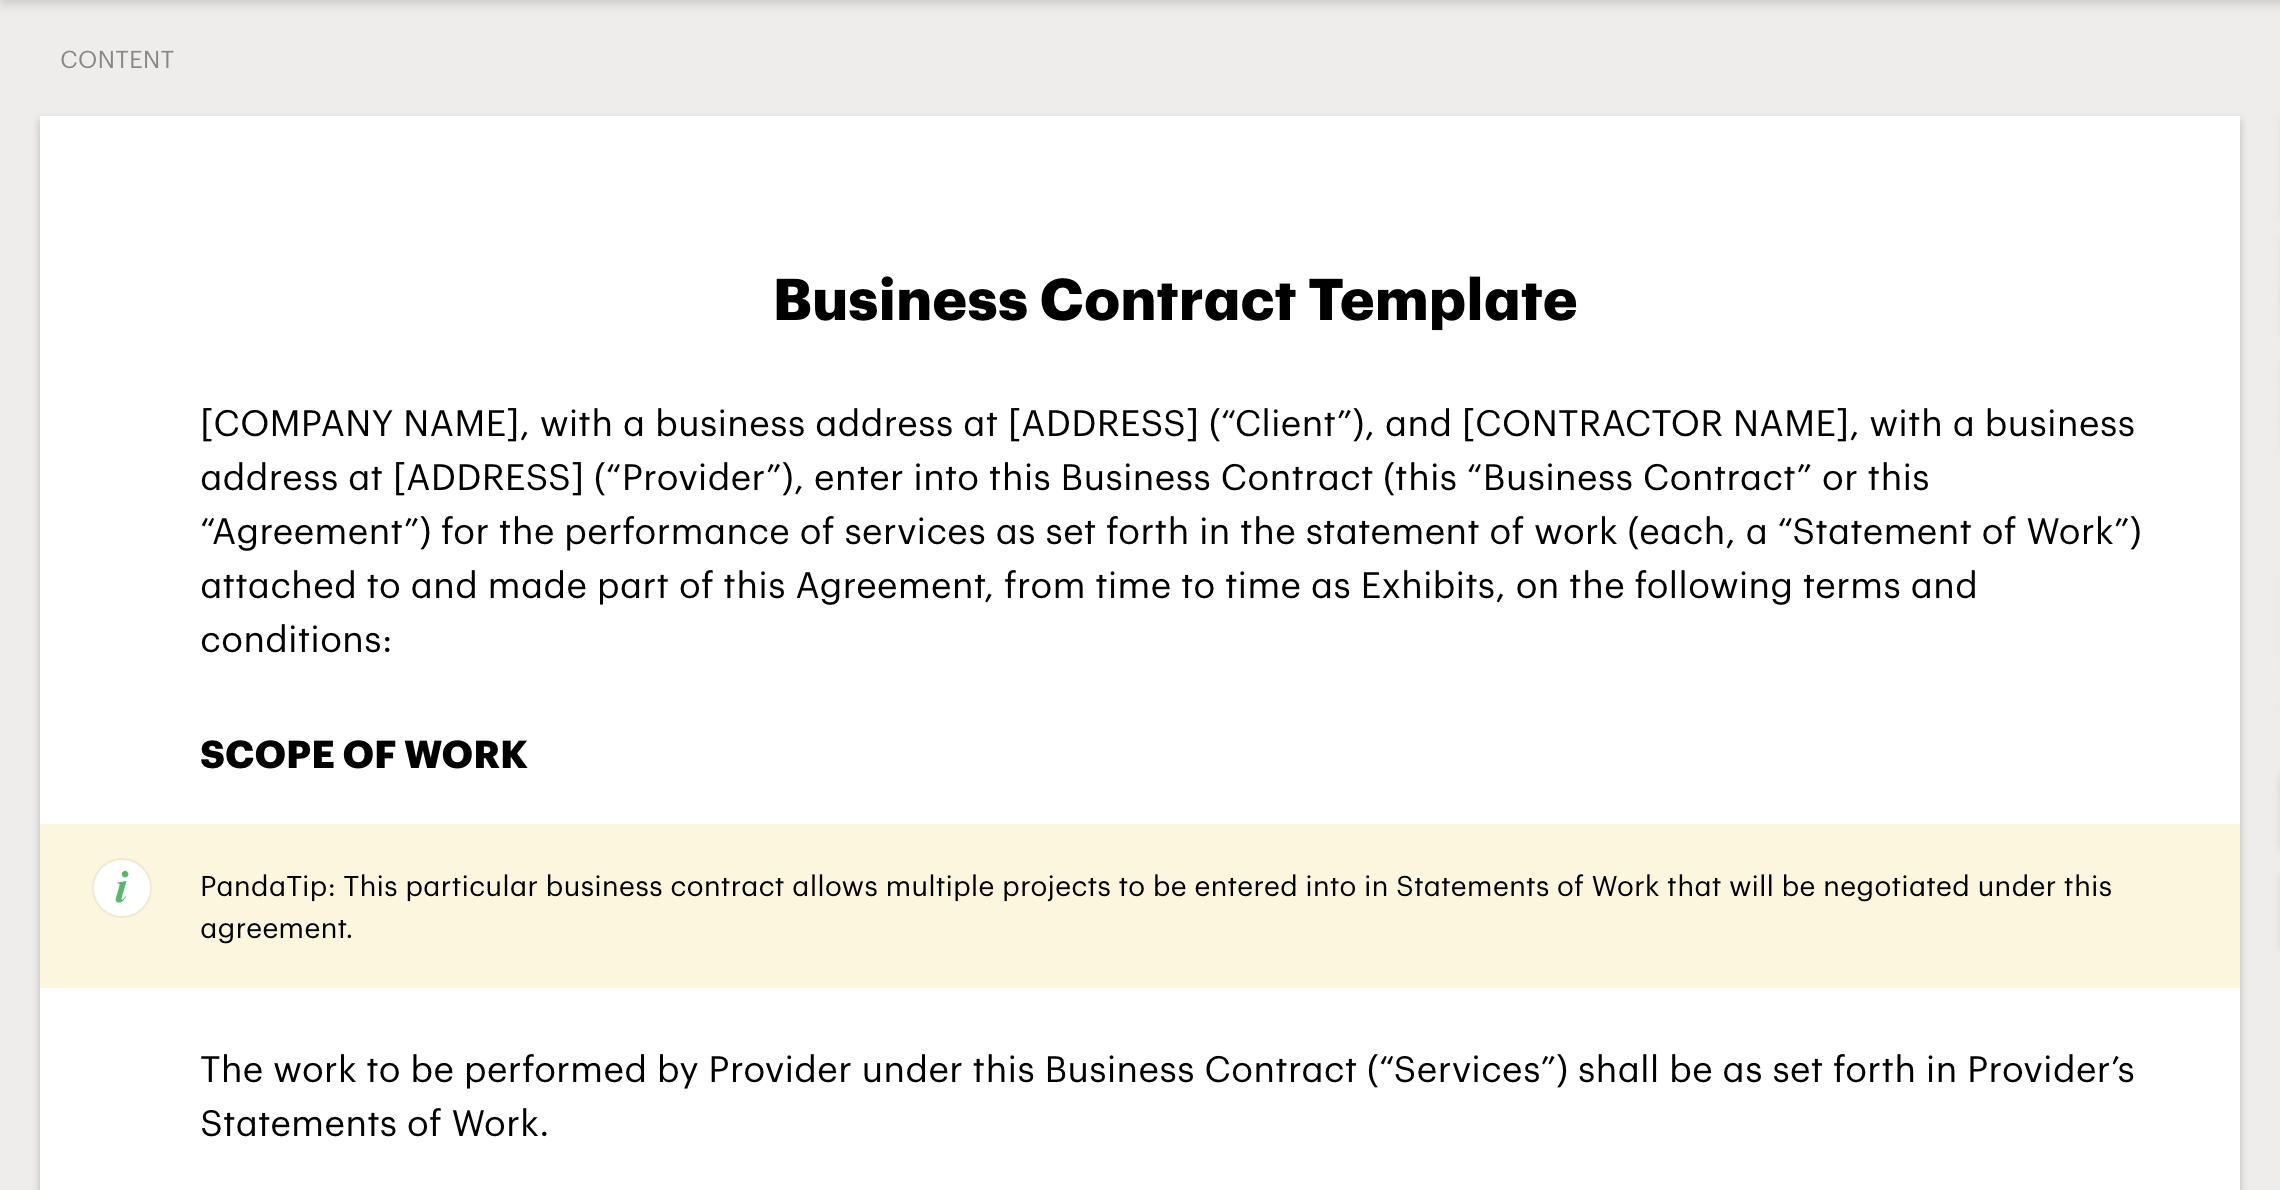 Business contract sample